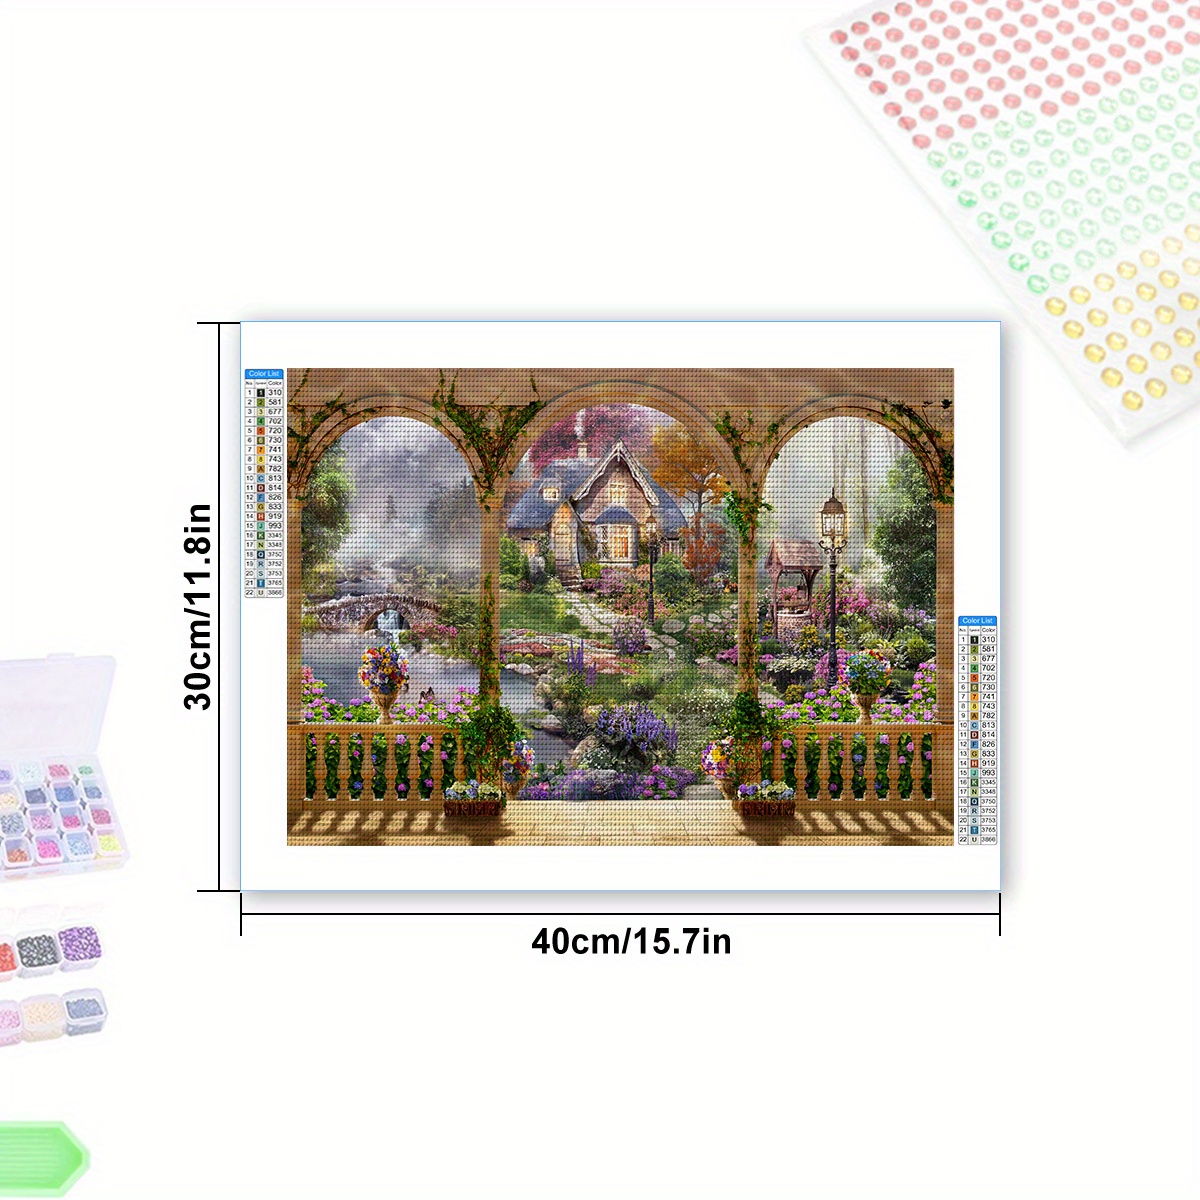 1pc Handmade 5D Diamond Painting Kit for Home and Wall Art Decor - Perfect Gift for Family and Friends